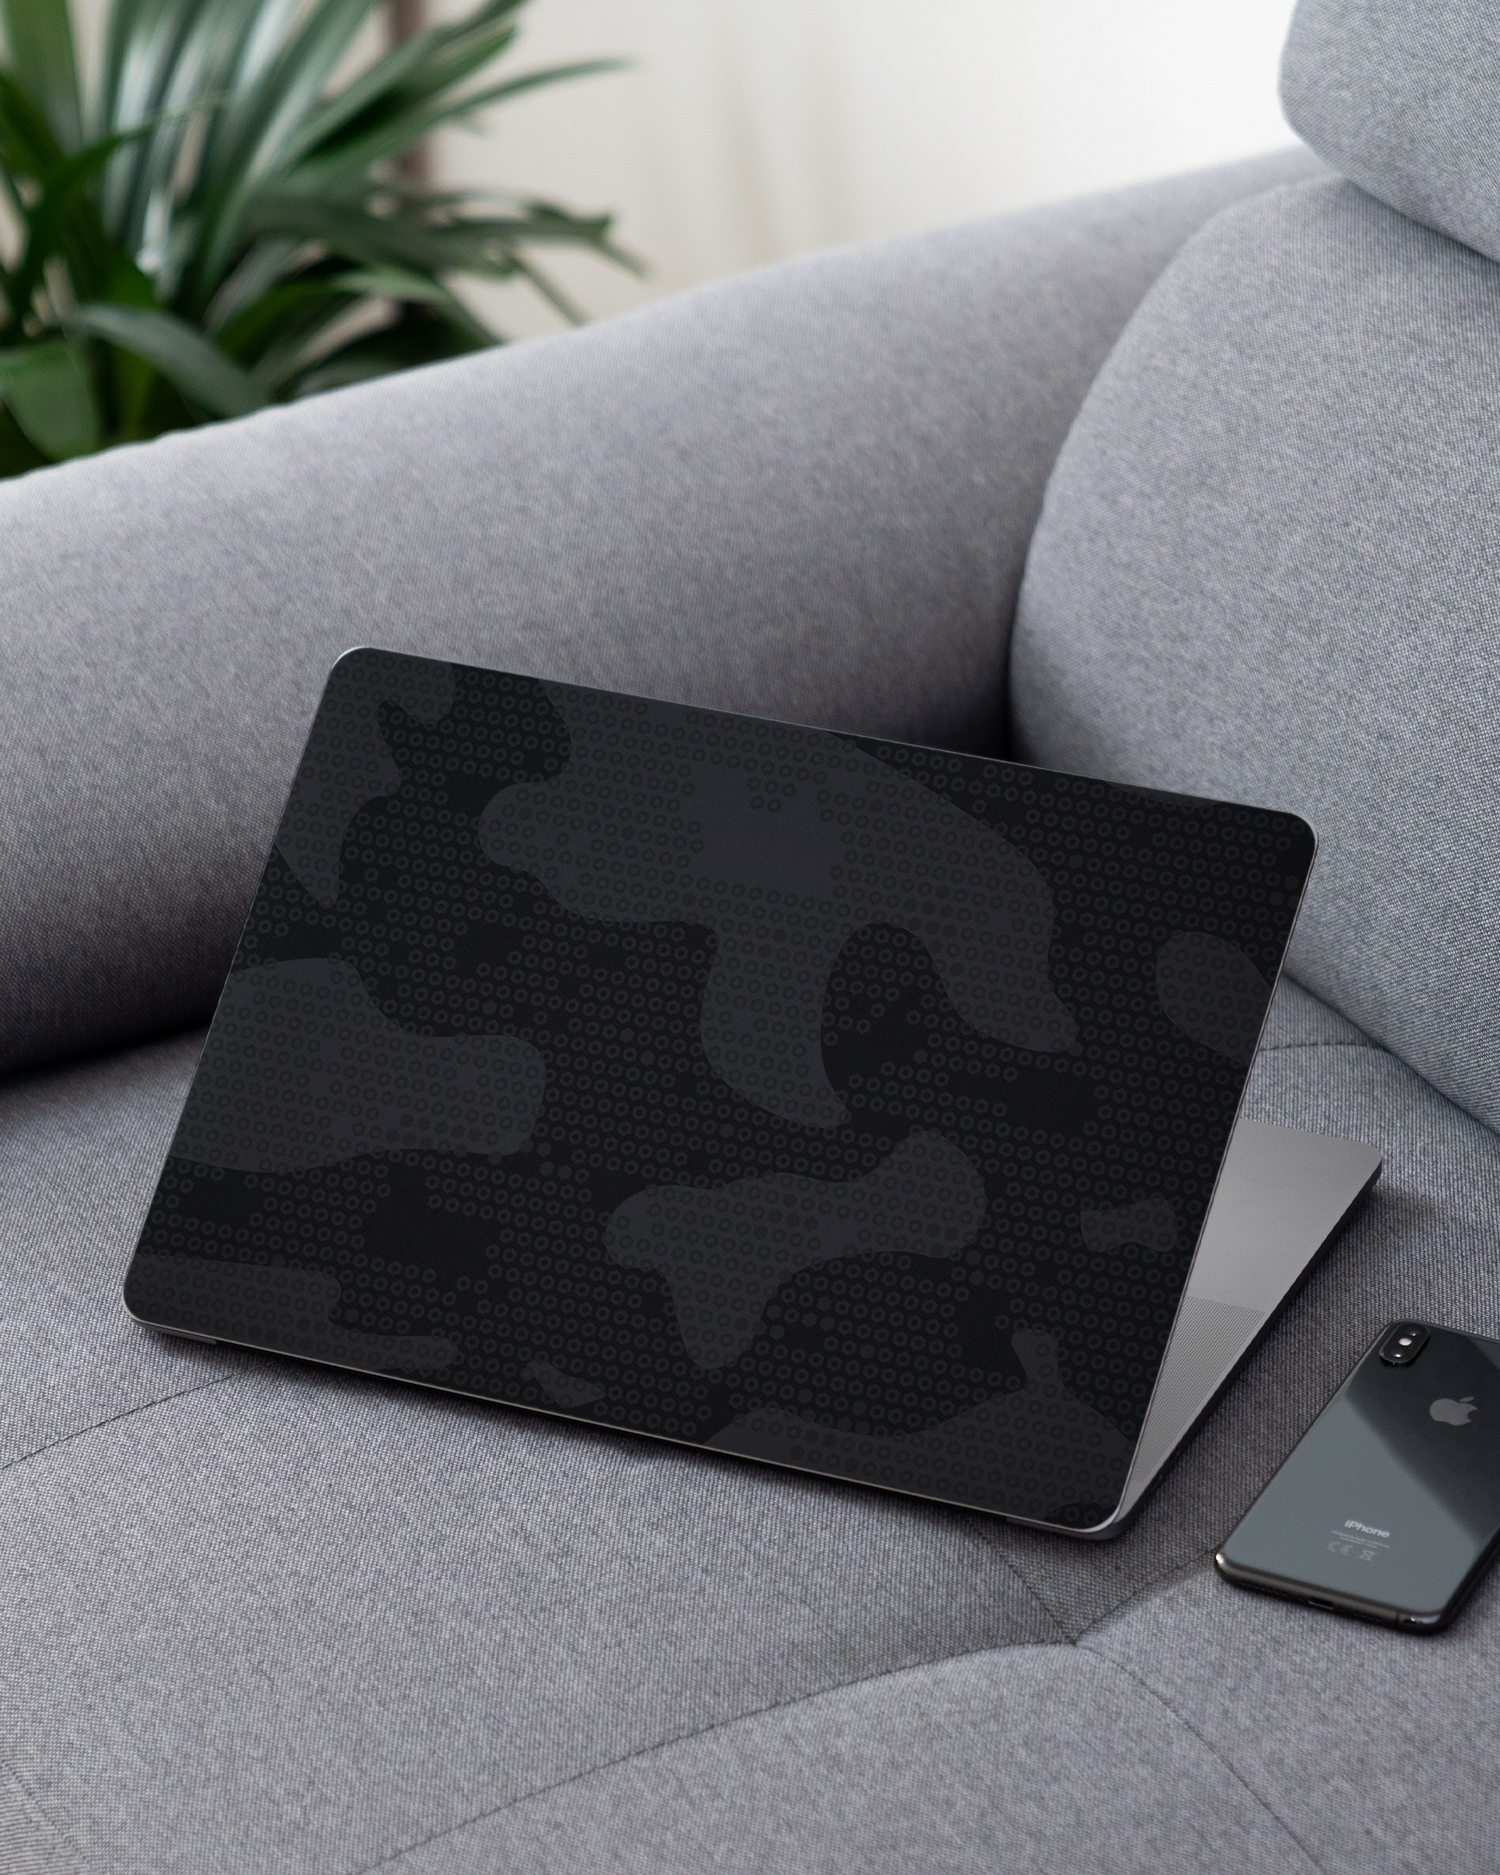 Spec Ops Dark Laptop Skin for 13 inch Apple MacBooks on a couch